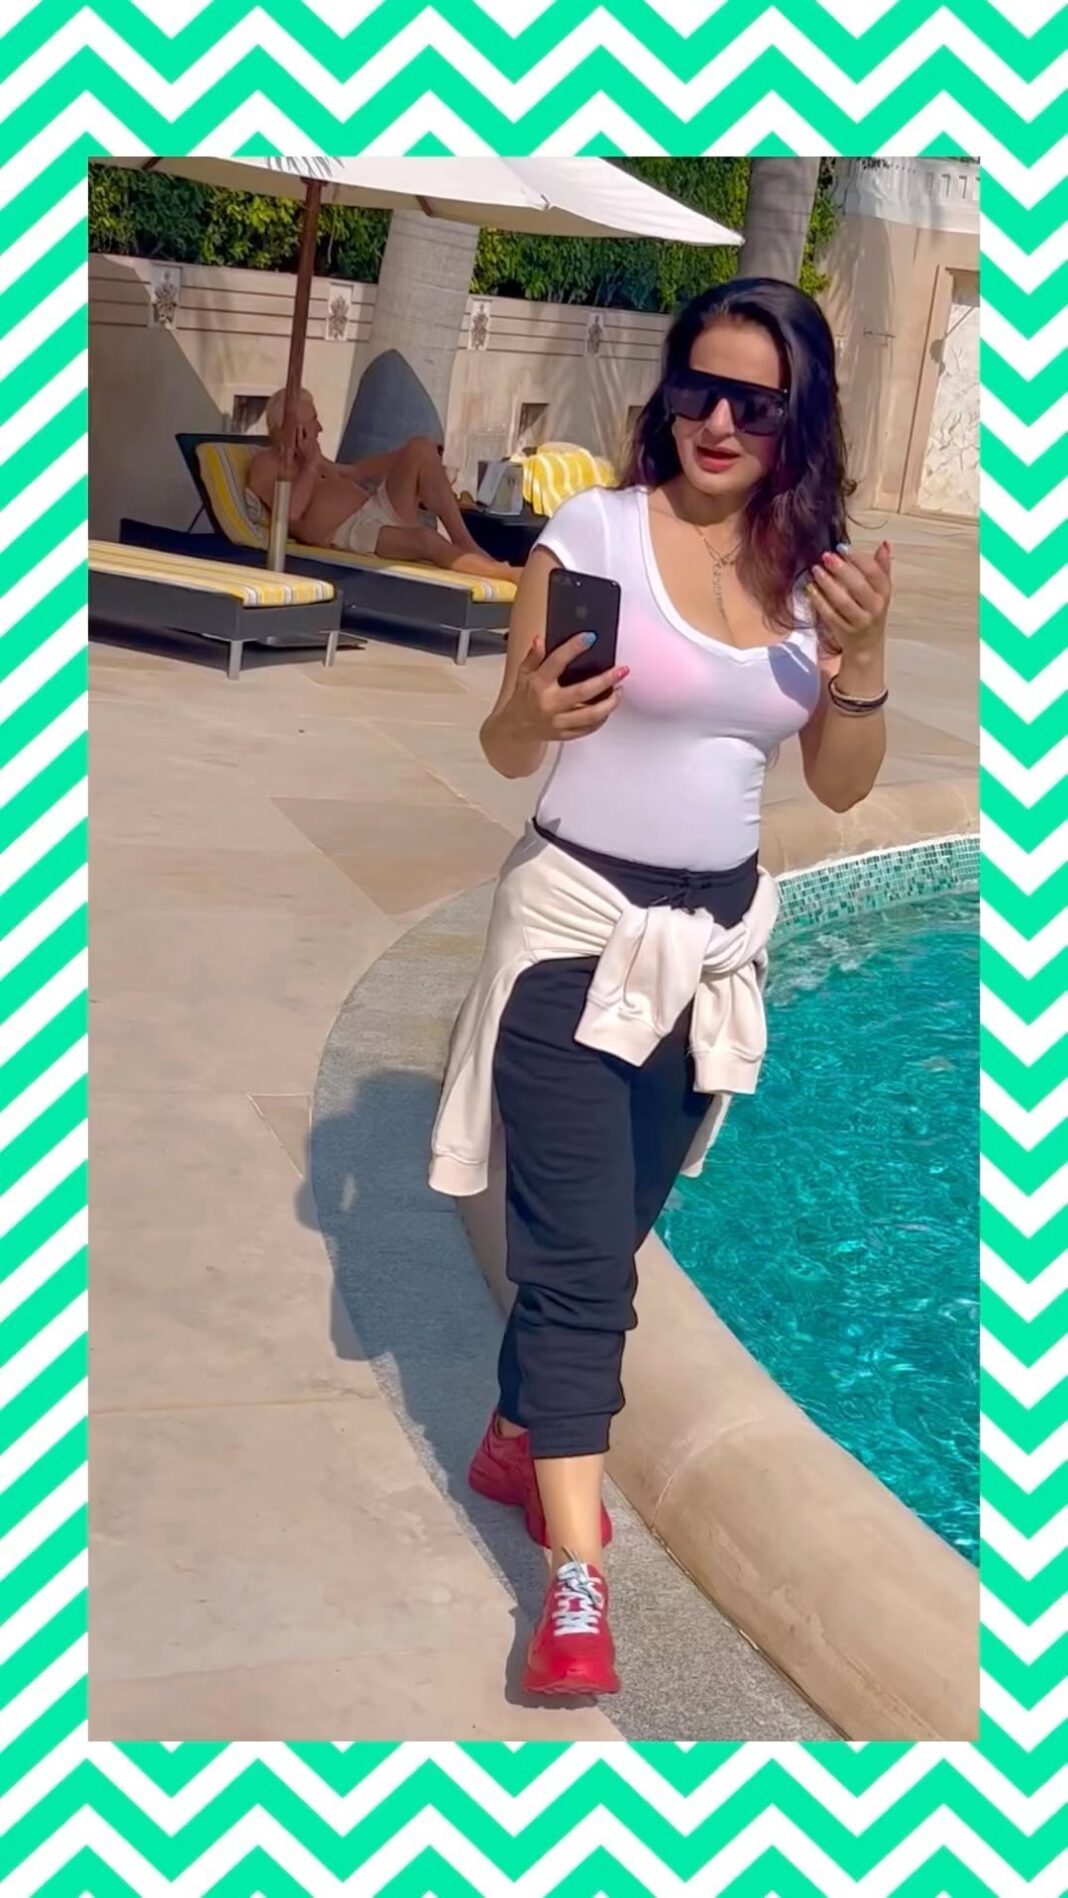 Ameesha Patel Instagram - DELHI…Before A long day ahead it’s always lovely to chat with my lovely fans over some Video Calls …4 best deals 4 Meet n greets ,, Corporate shows or Video calls whatssap my most trusted manager Mr Mahesh on +91 98330 20363👍🏻👍🏻💯